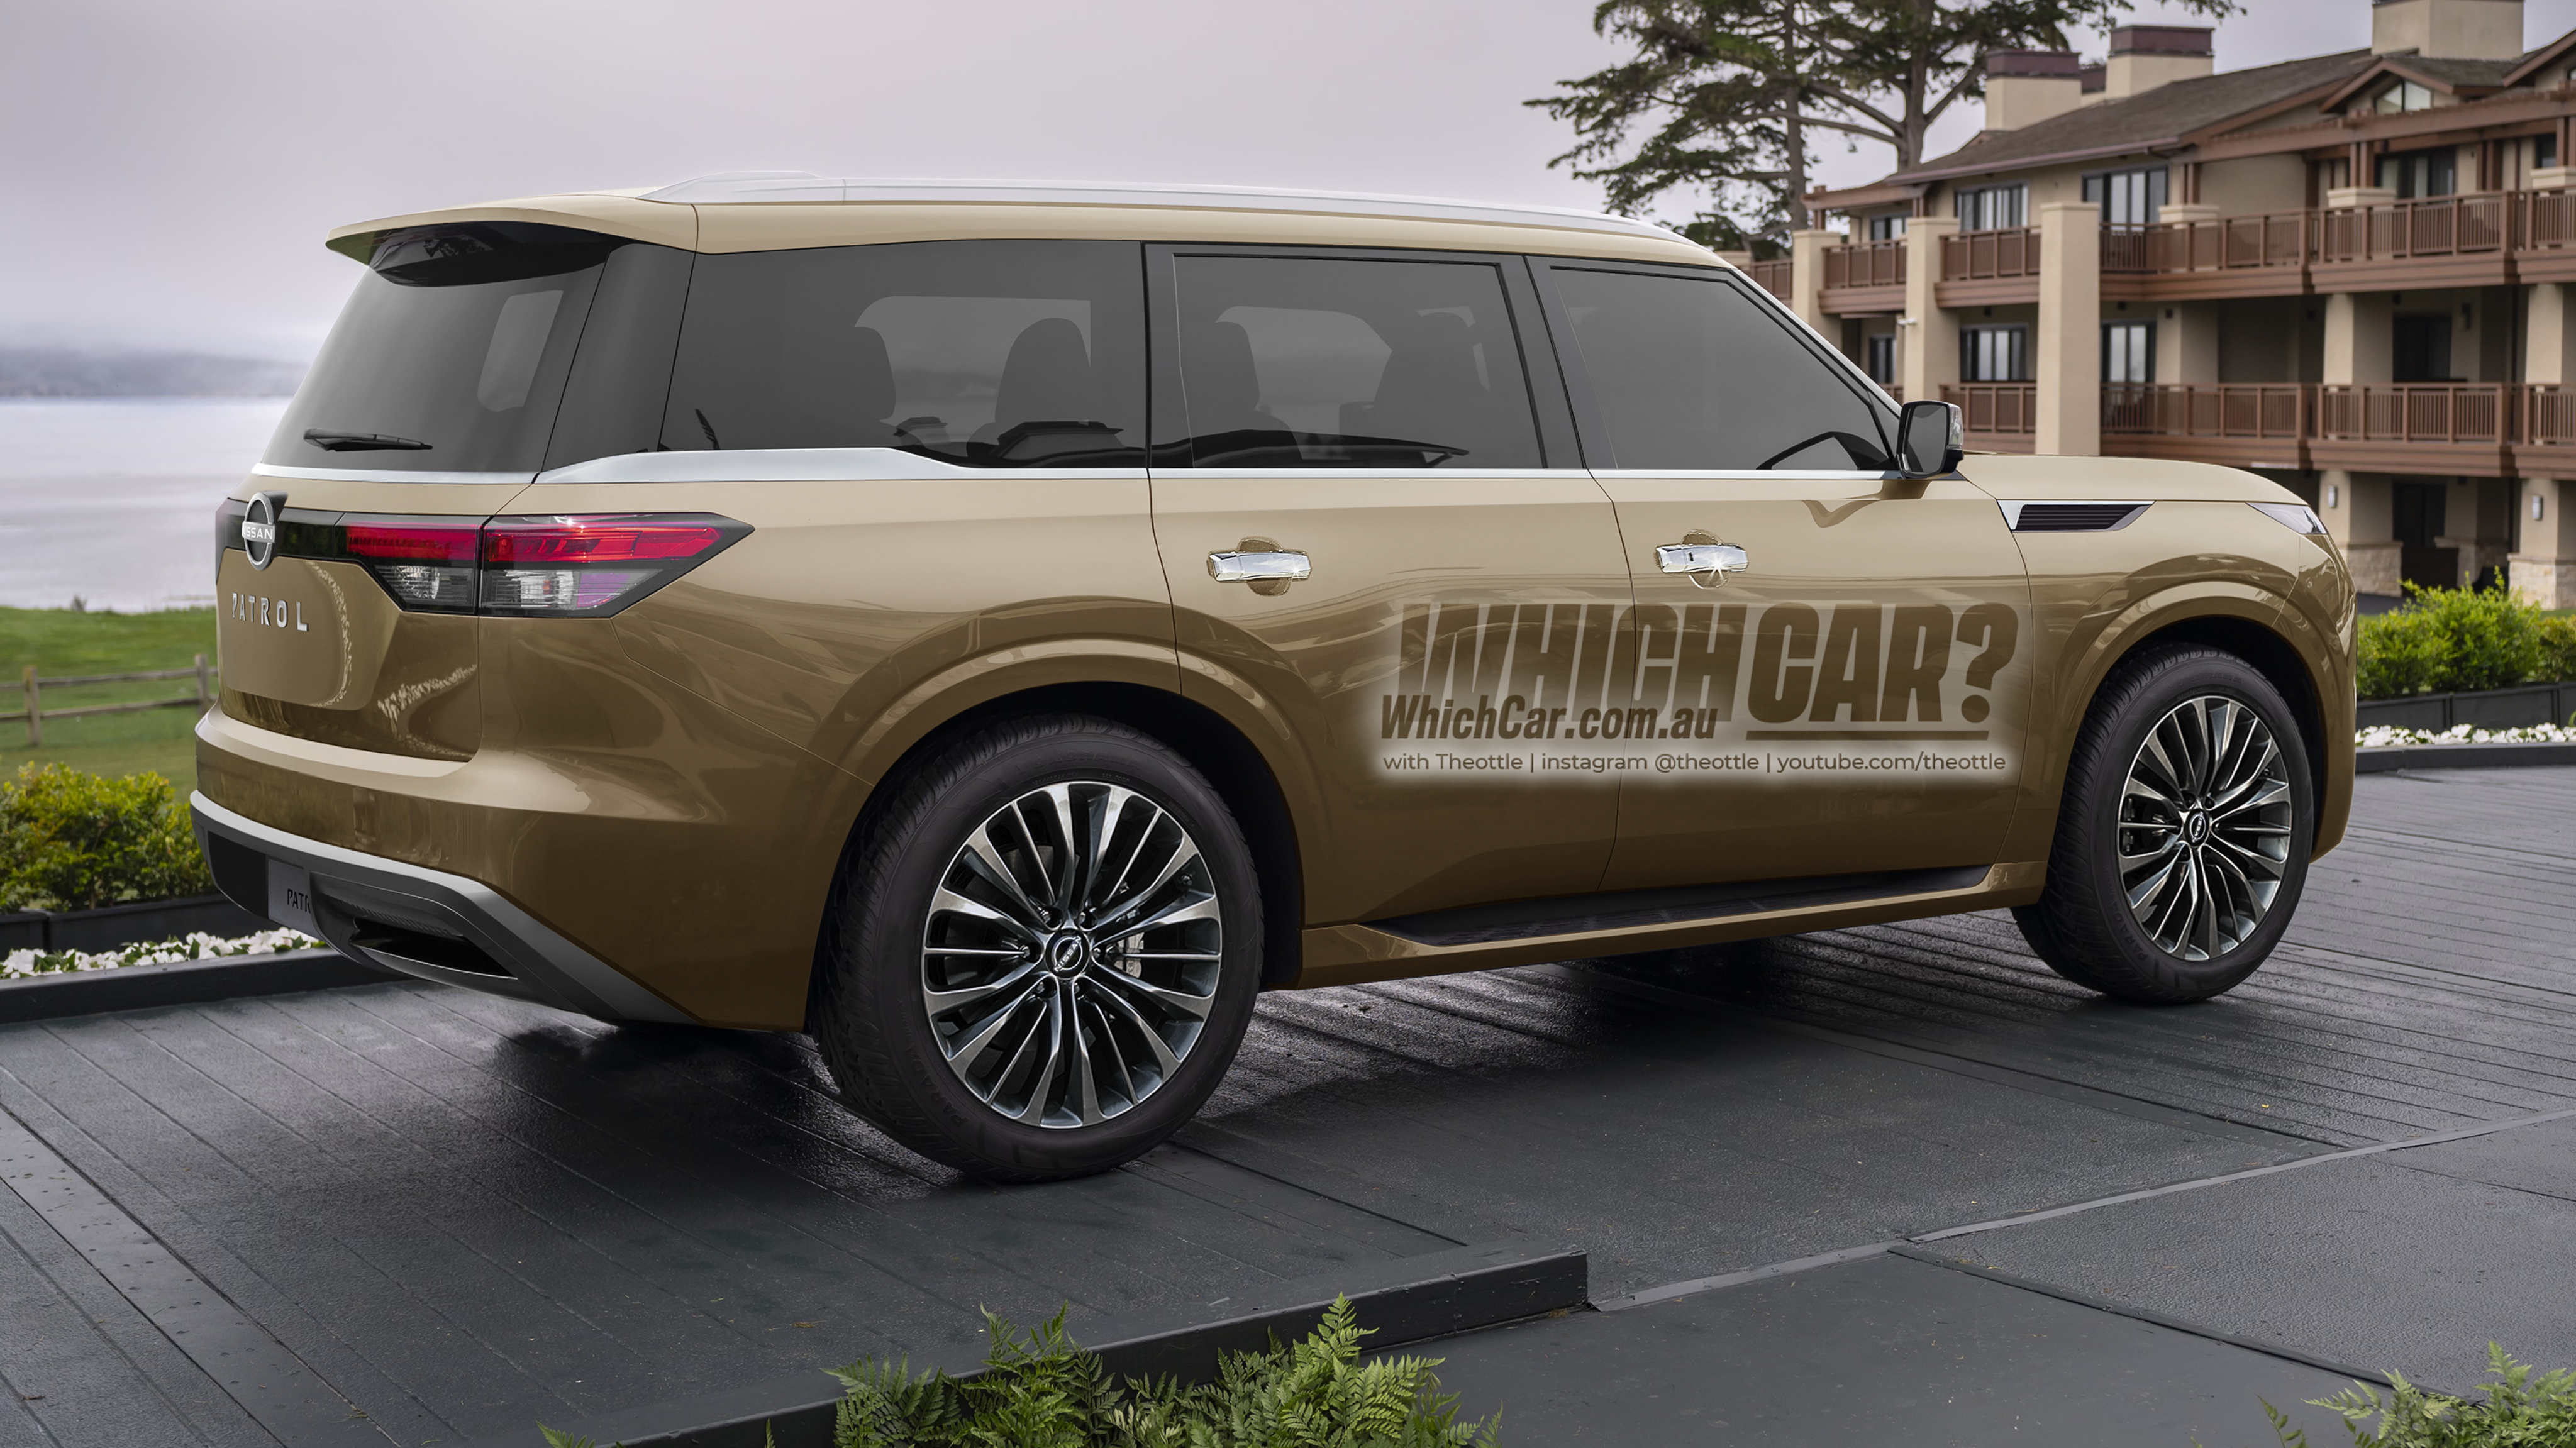 30b21dac/2025 nissan patrol imagined whichcar australia theottle 02 png